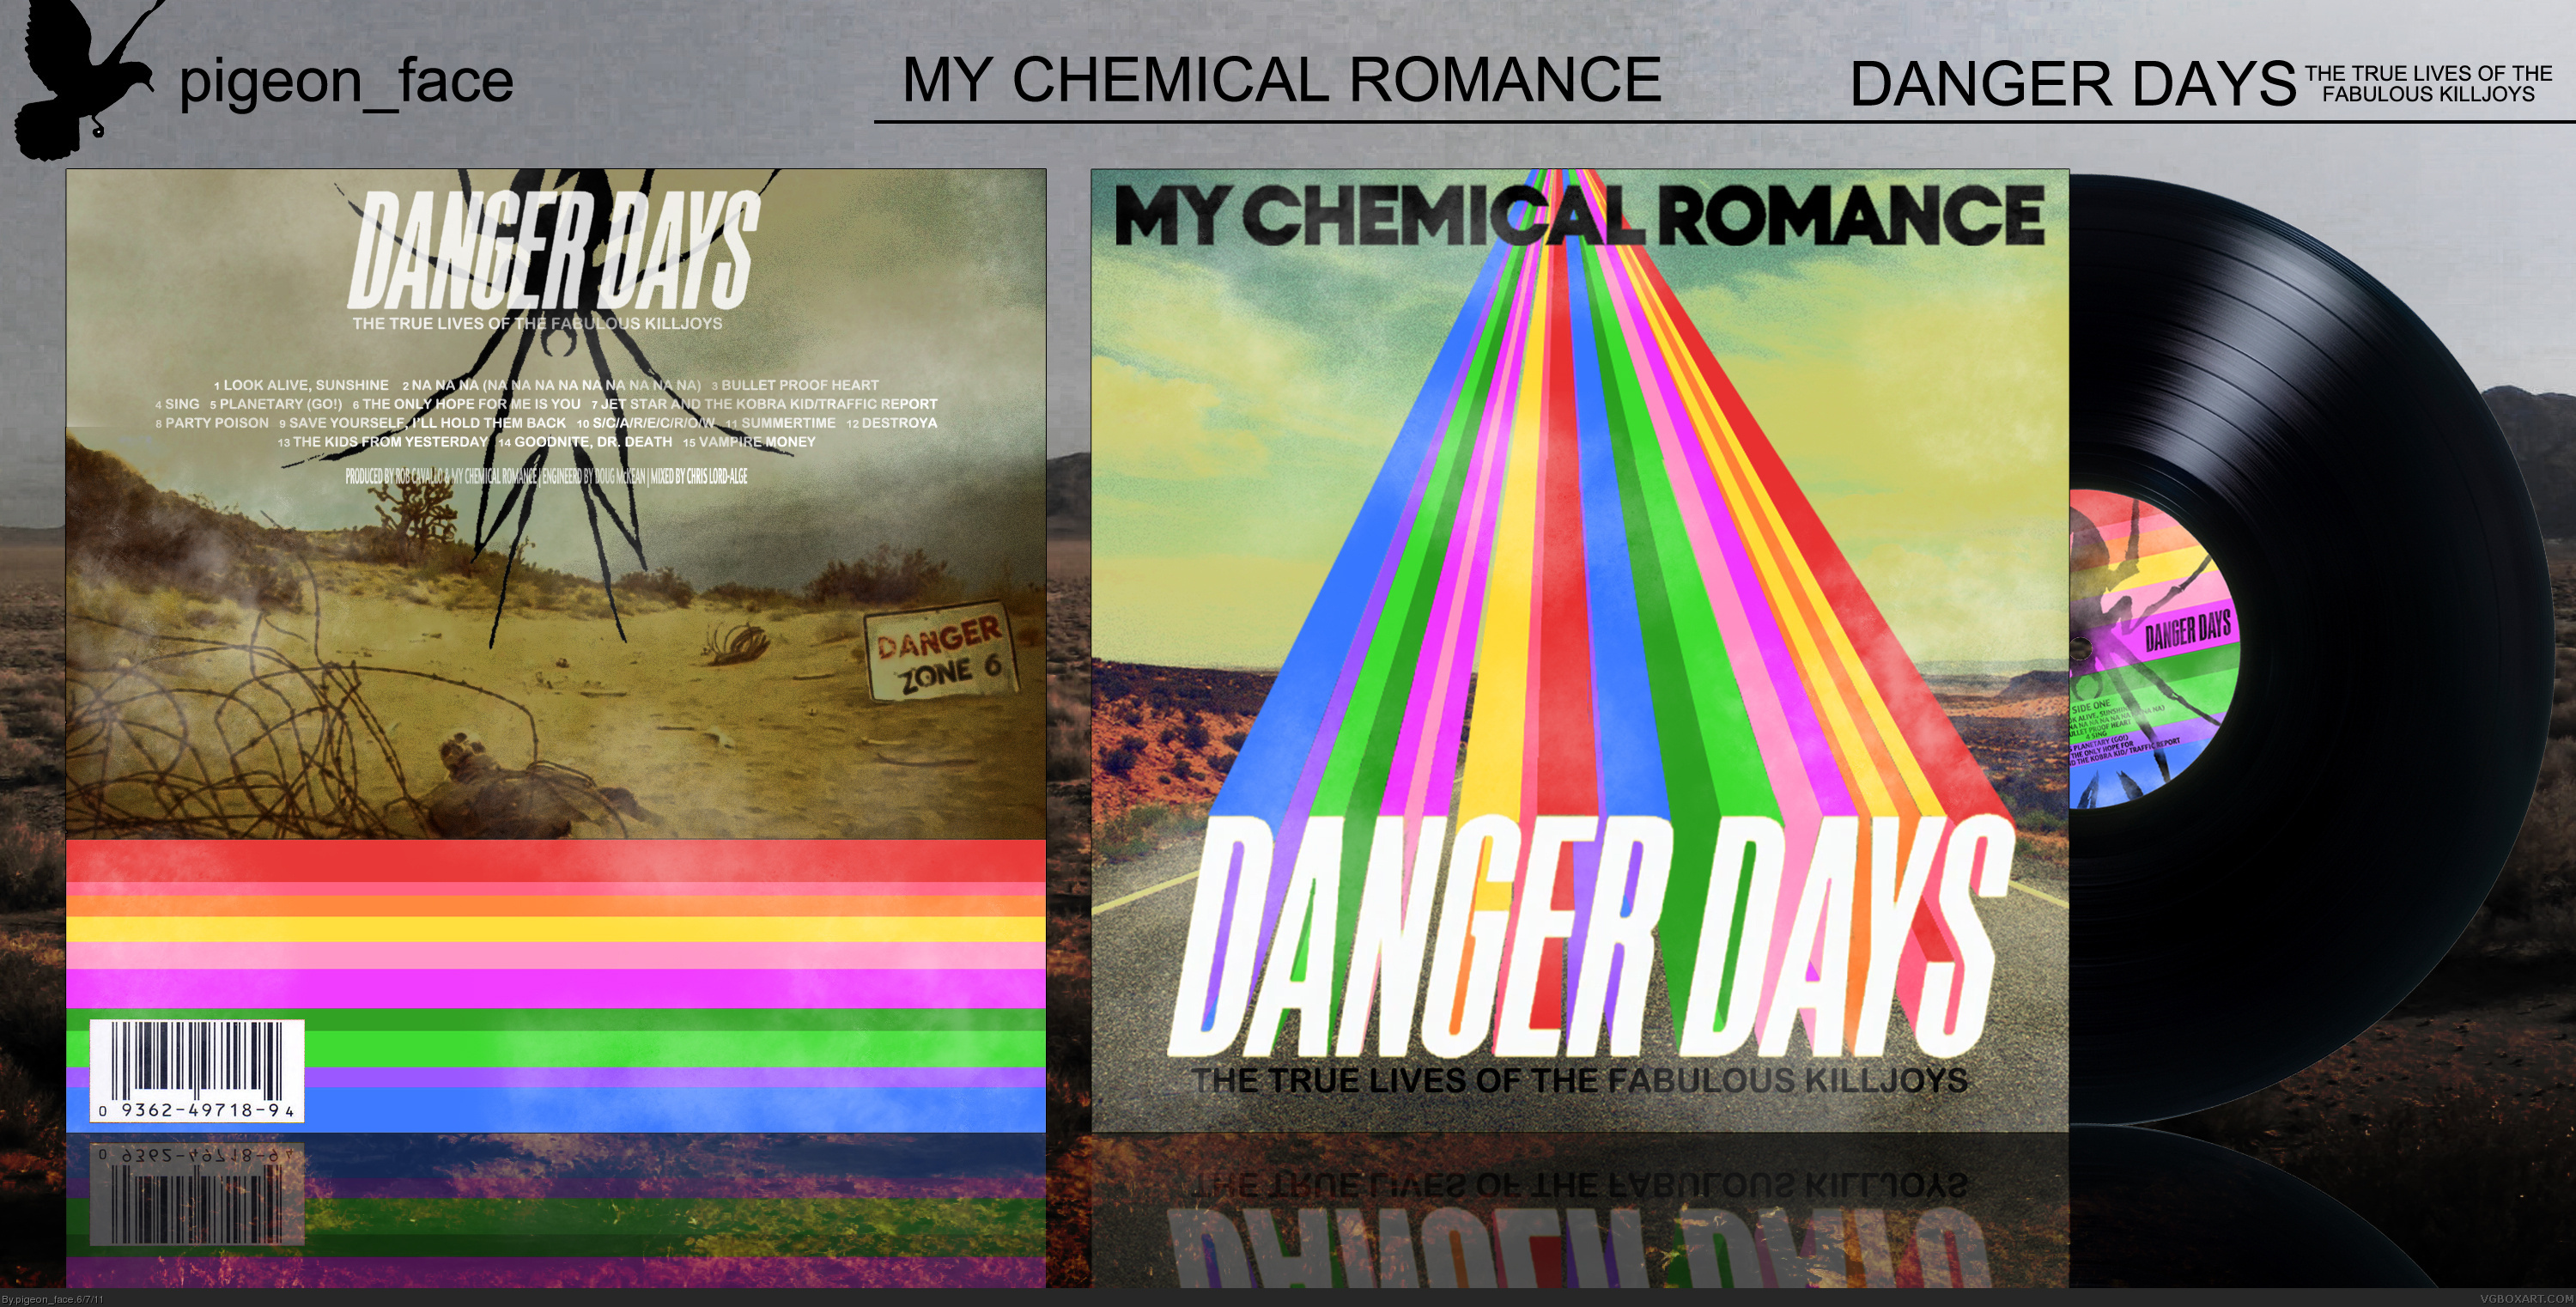 My Chemical Romance: Danger Days Music Box Art Cover by pigeon_face3000 x 1522